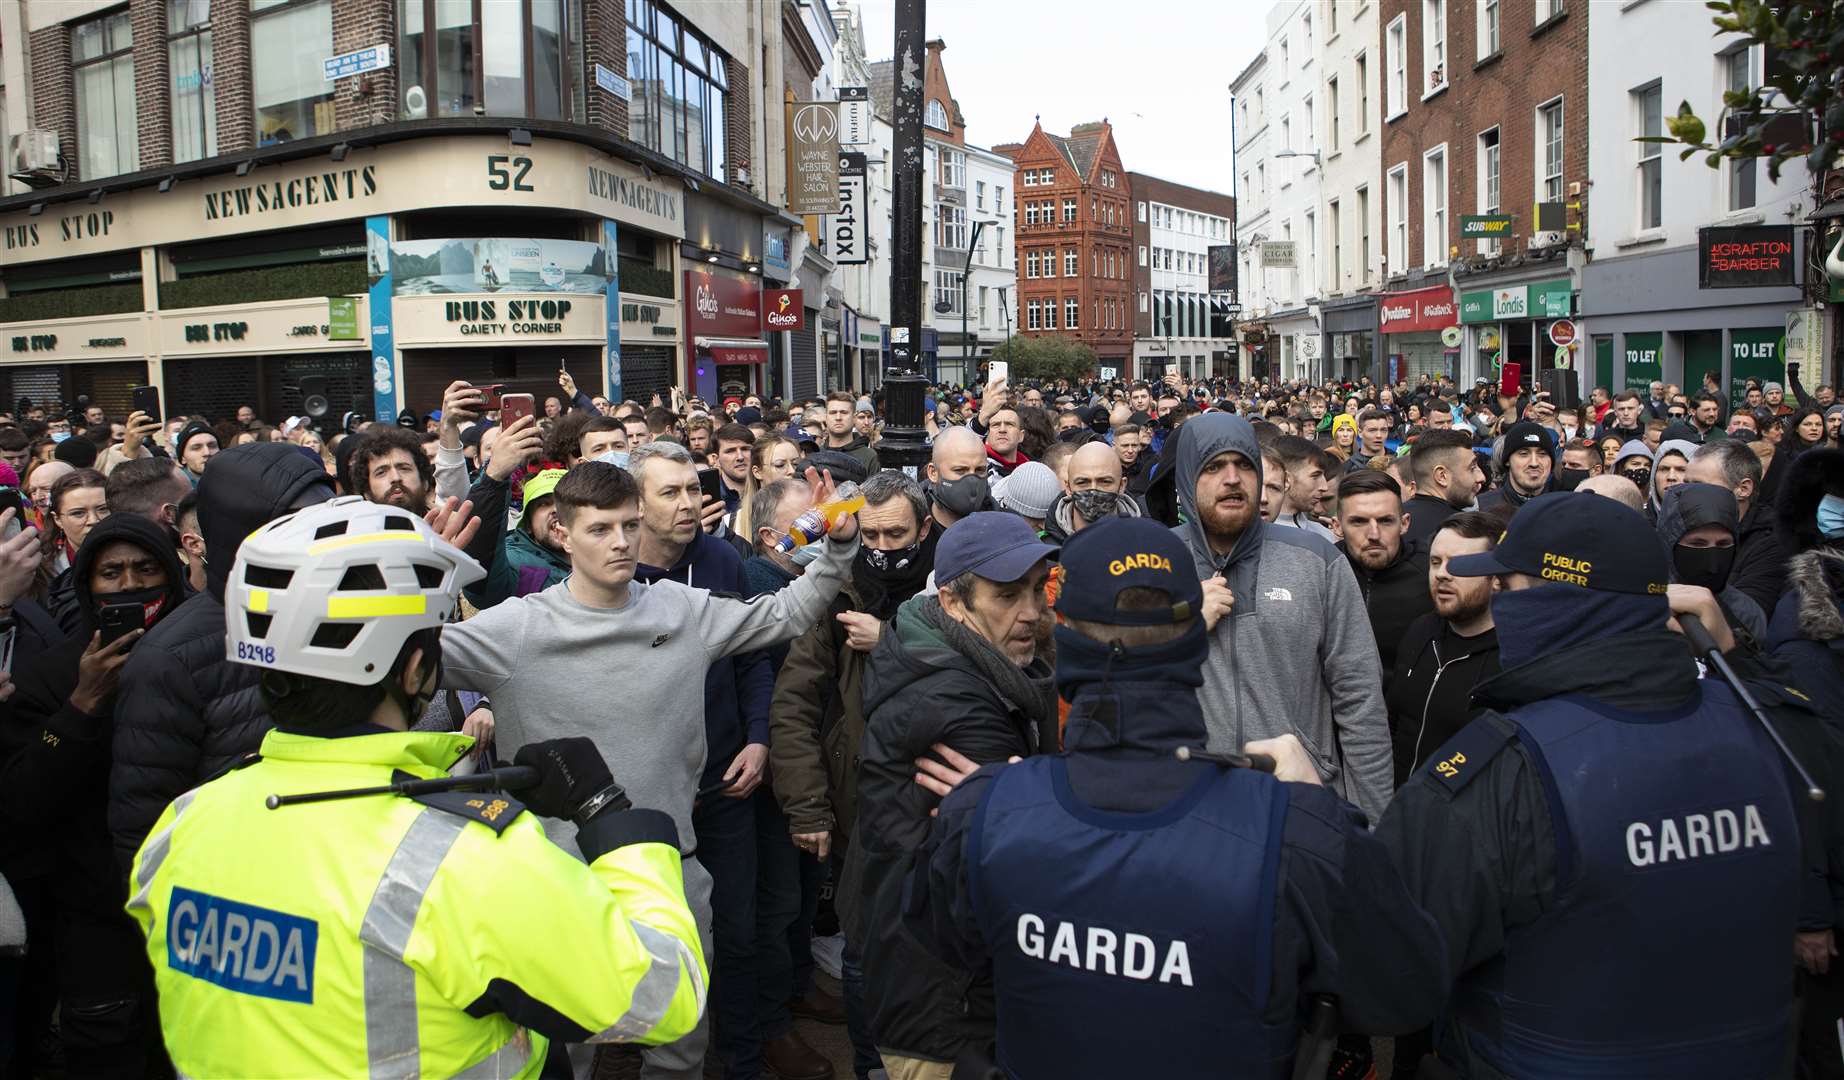 Gardai talk to protesters during an anti-lockdown protest in Dublin city centre (Damian Eagers/PA)